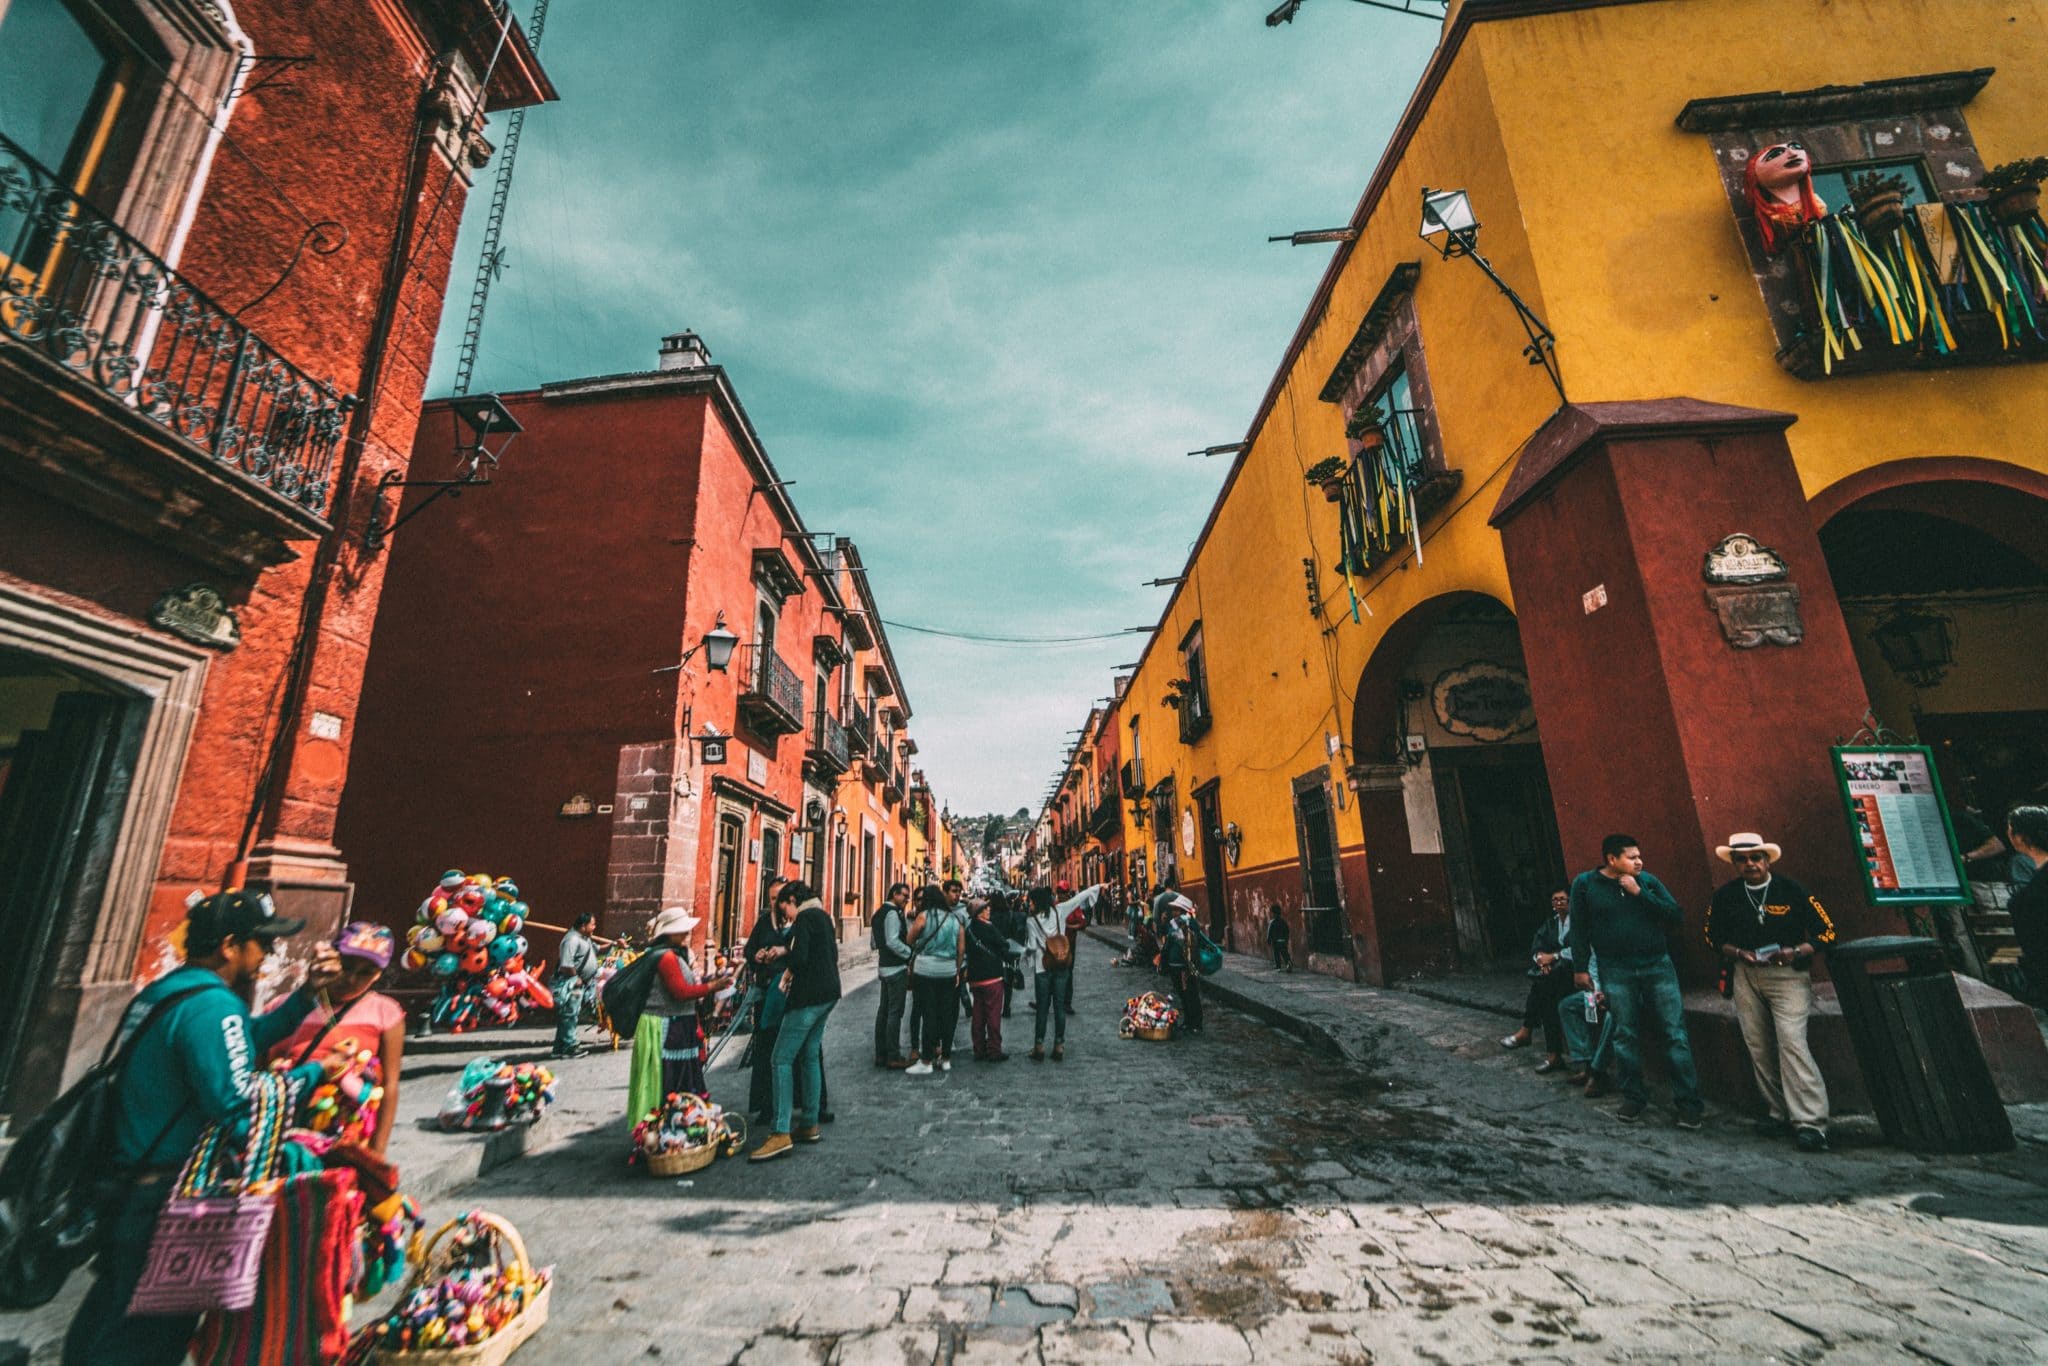 view of a side street in things to do in Merida Mexico with vendors and old colonial buildings